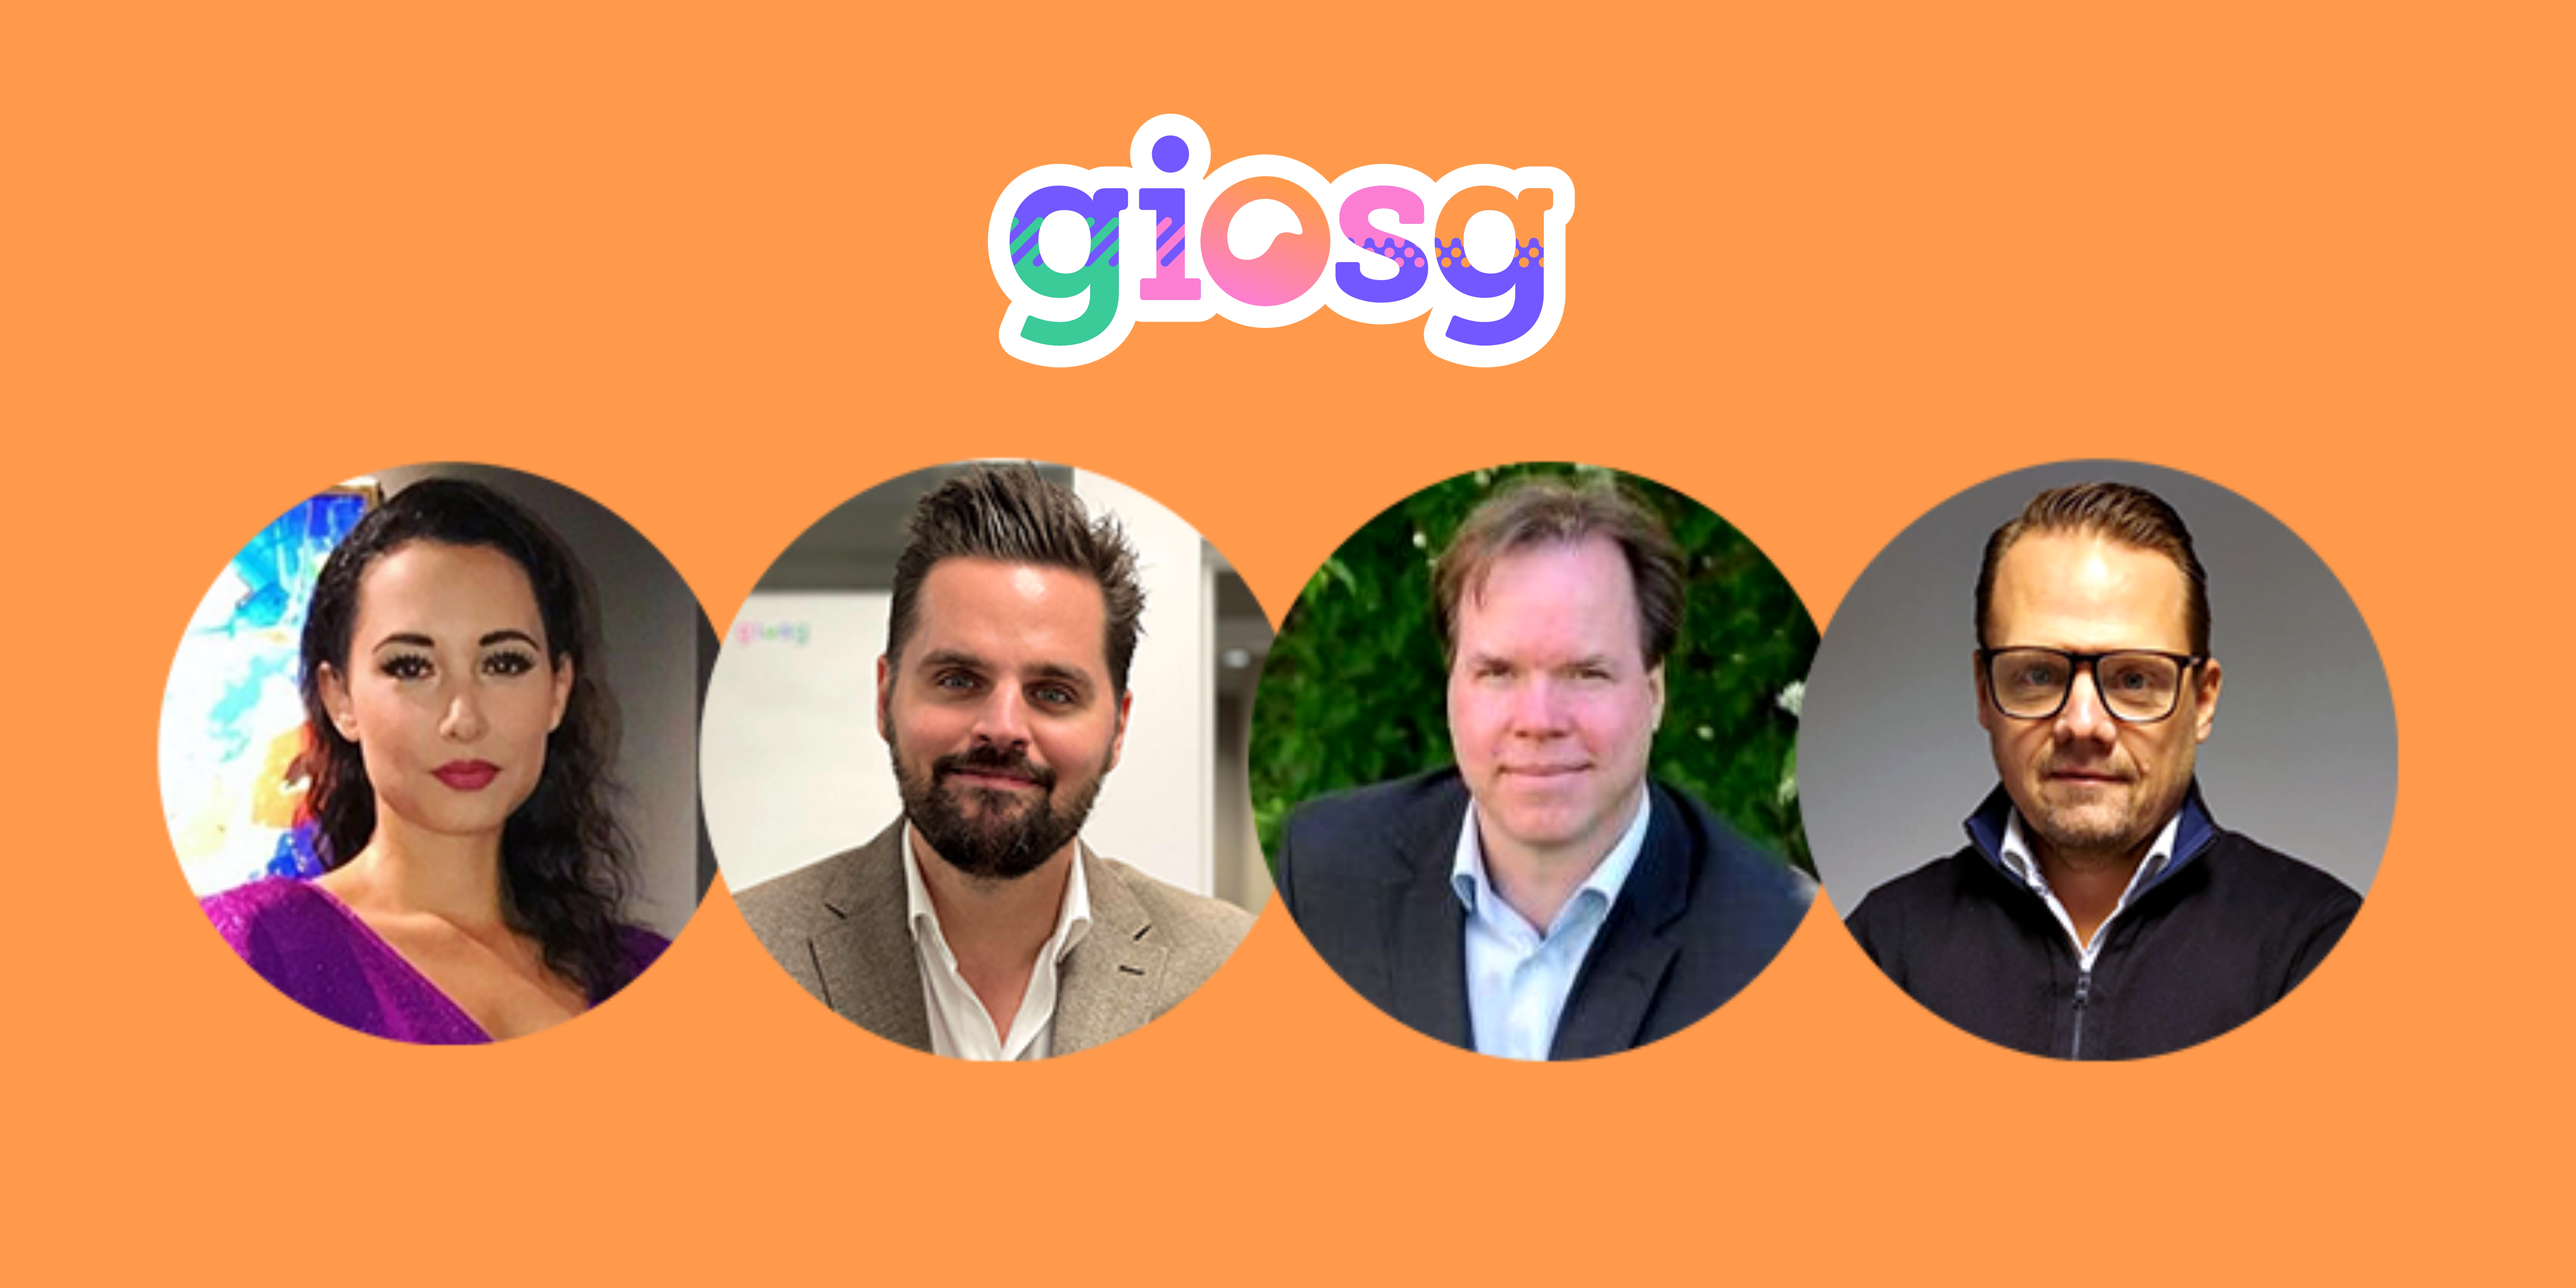 Giosg expands in Sweden - makes four new recruitments